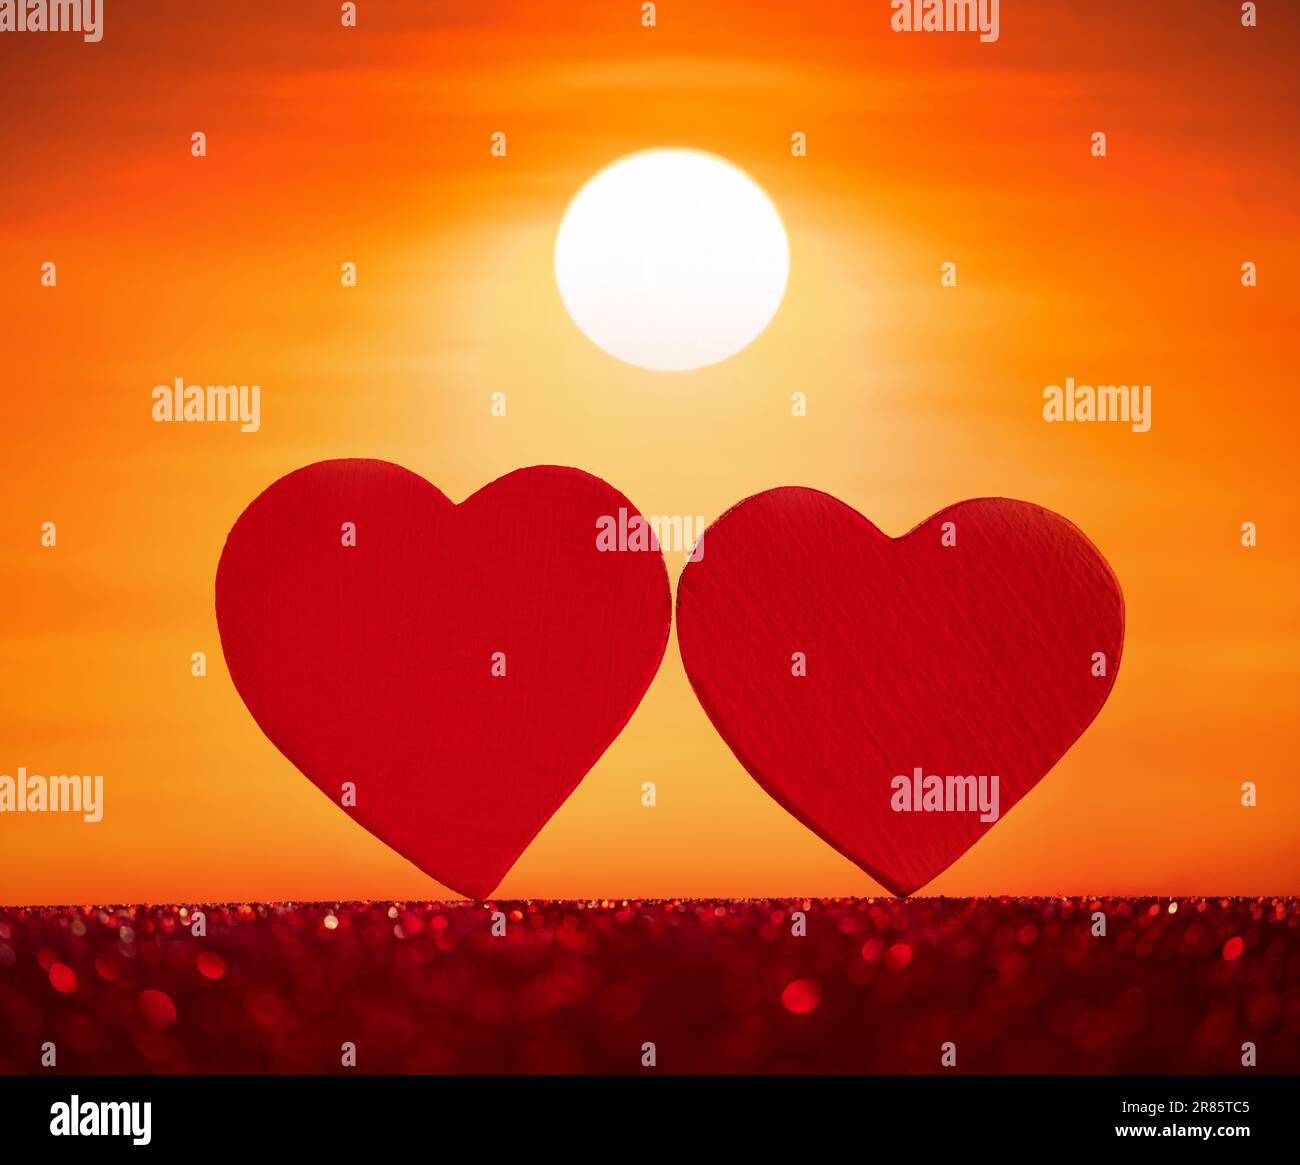 Two hearts side by side with sunset background. Valentine's day concept. Stock Photo